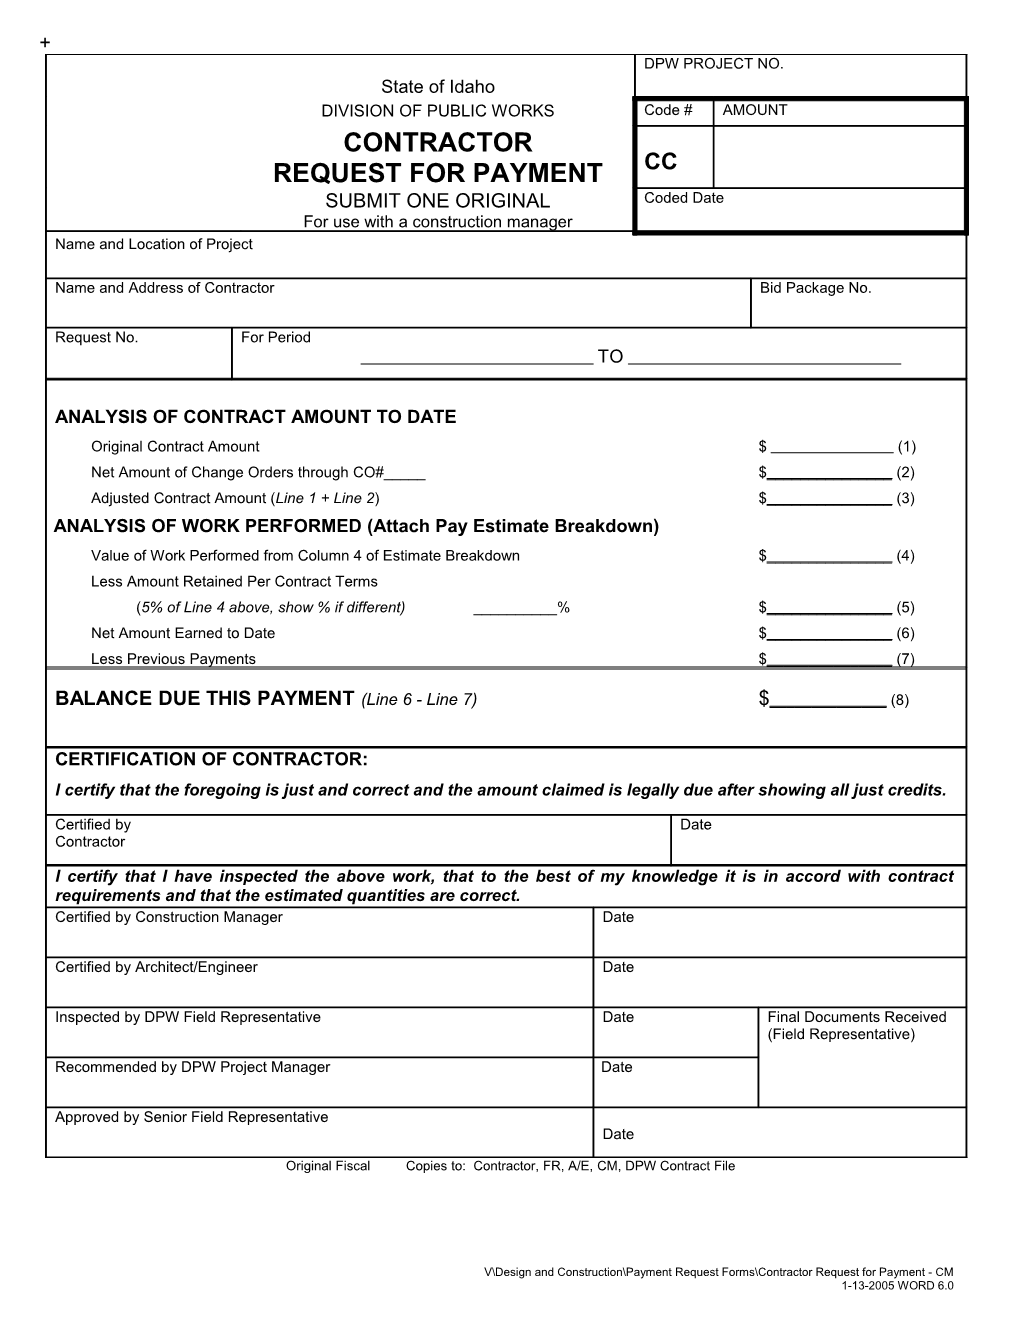 Contractor Request for Payment - for Use with a Construction Manager